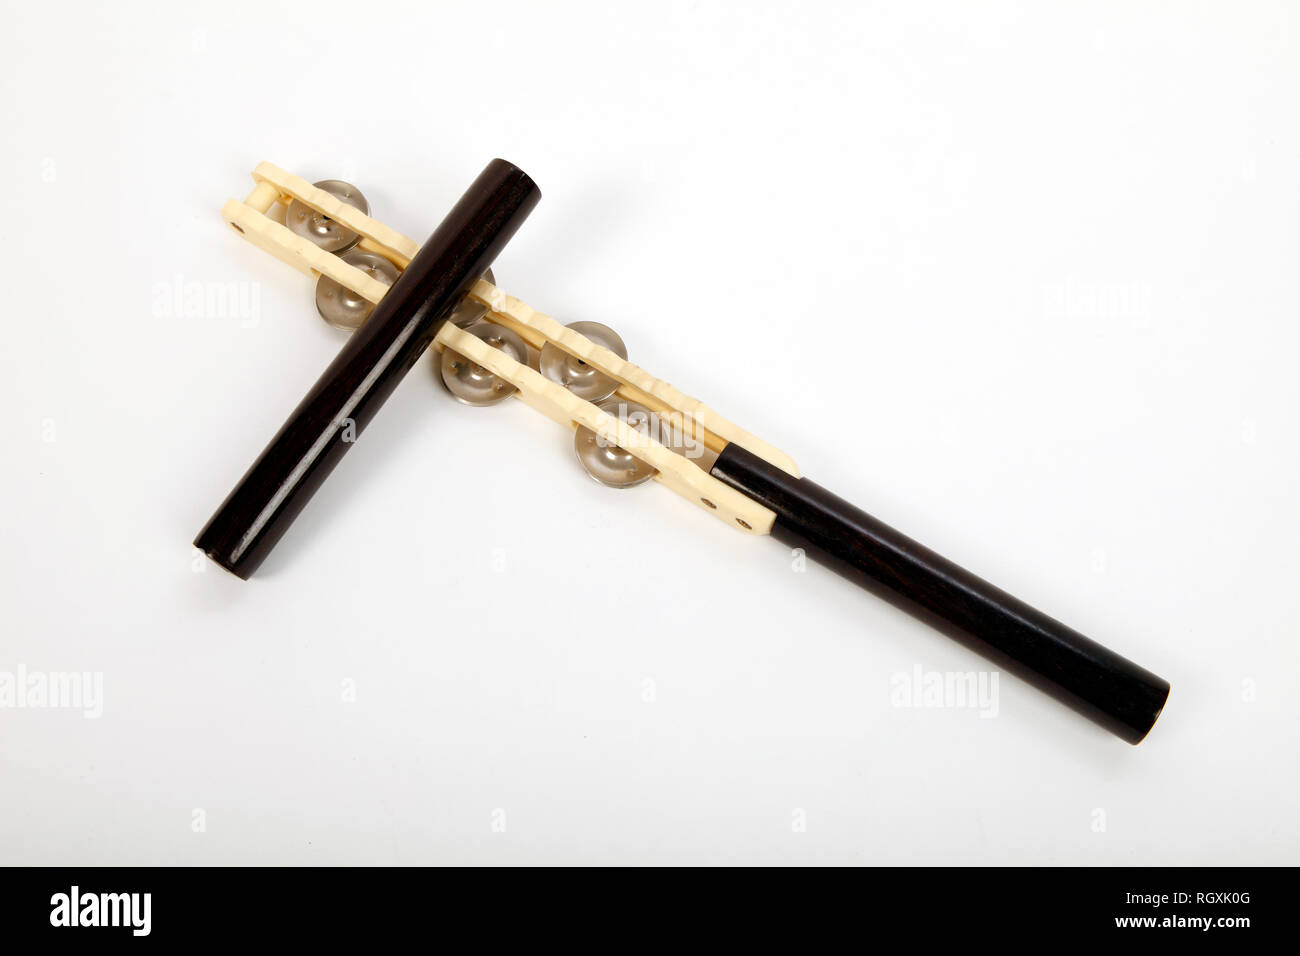 Jestick. Mixture of a clave, guiro effect and jingle stick. Made by Calato. Stock Photo